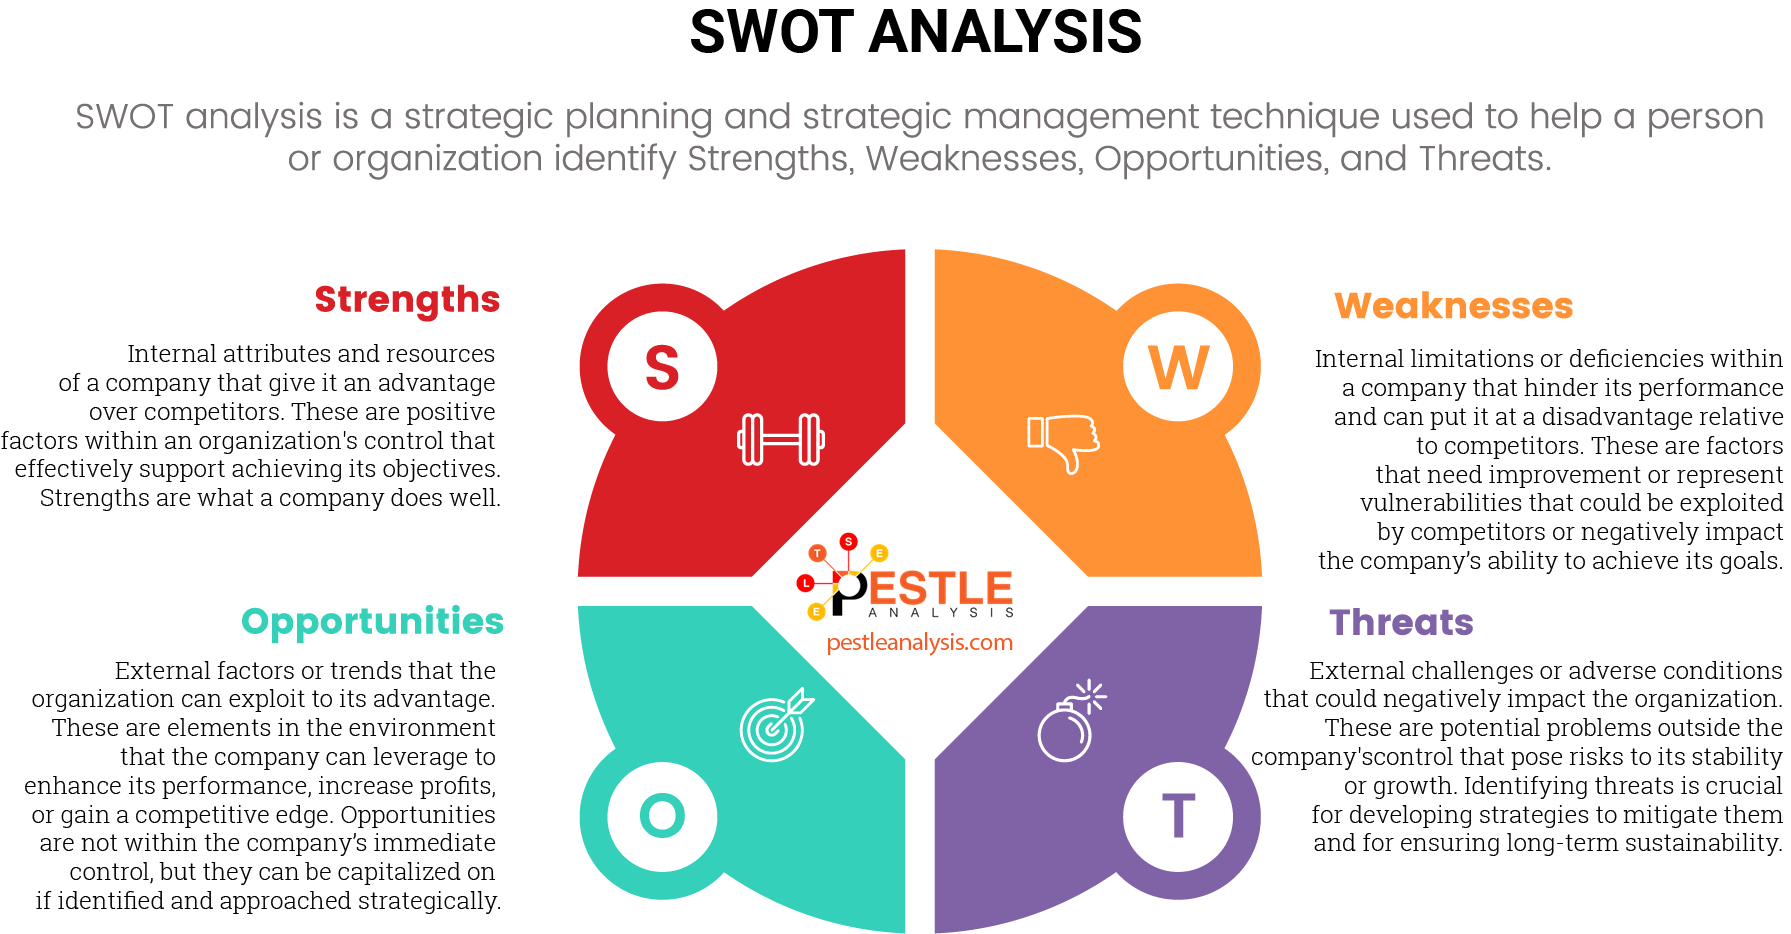 Important SWOT Analysis Questions Everyone Should Ask